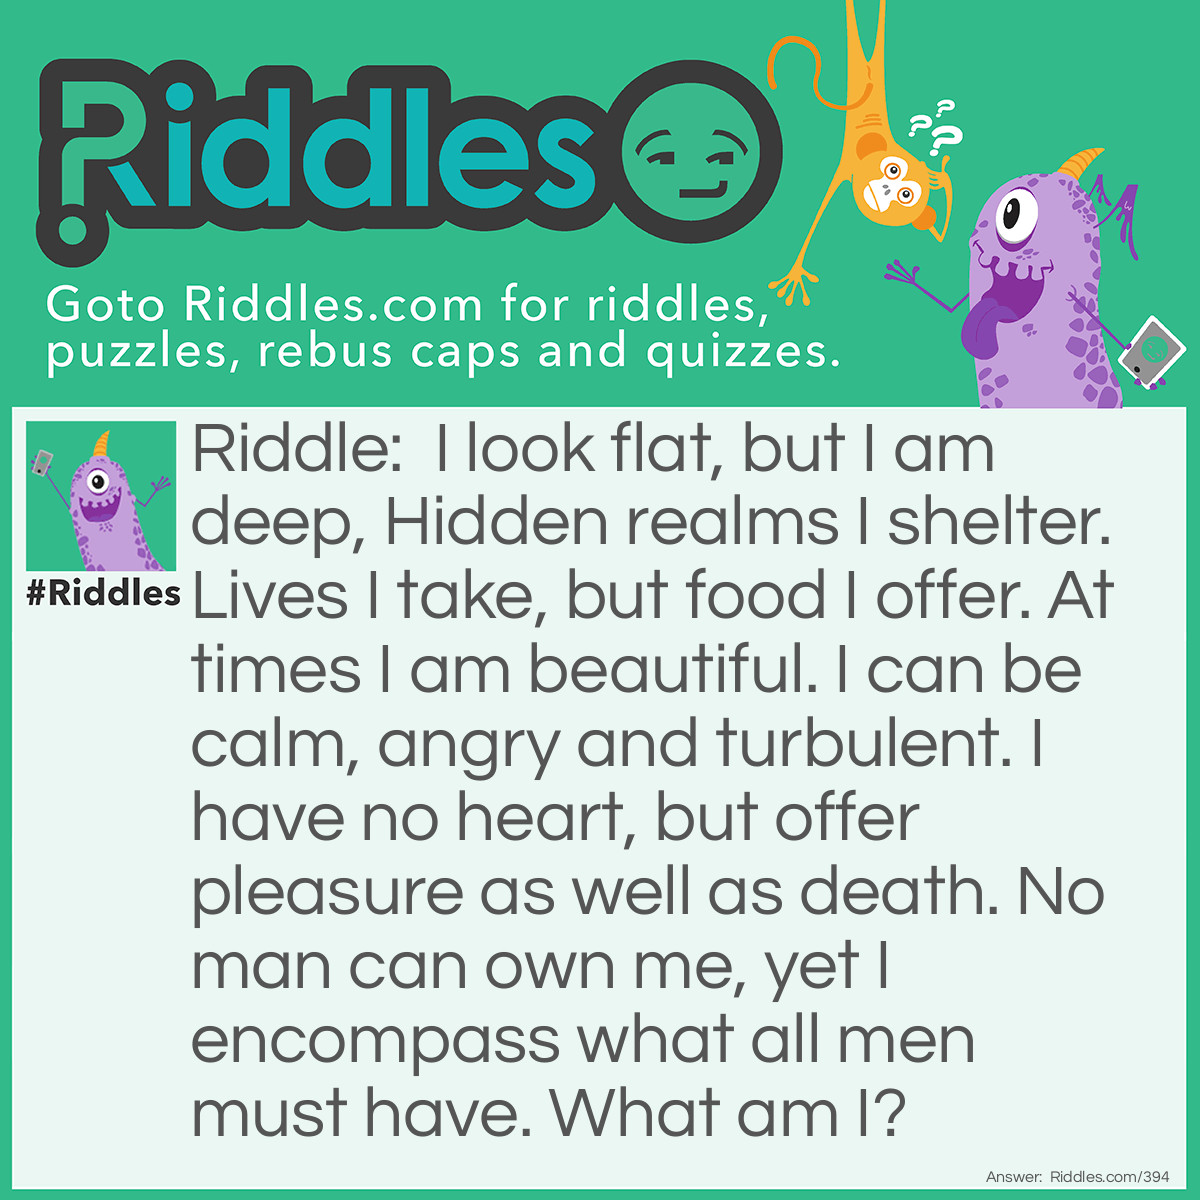 Riddle: I look flat, but I am deep, Hidden realms I shelter. Lives I take, but food I offer. At times I am beautiful. I can be calm, angry and turbulent. I have no heart, but offer pleasure as well as death. No man can own me, yet I encompass what all men must have. What am I? Answer: An ocean.